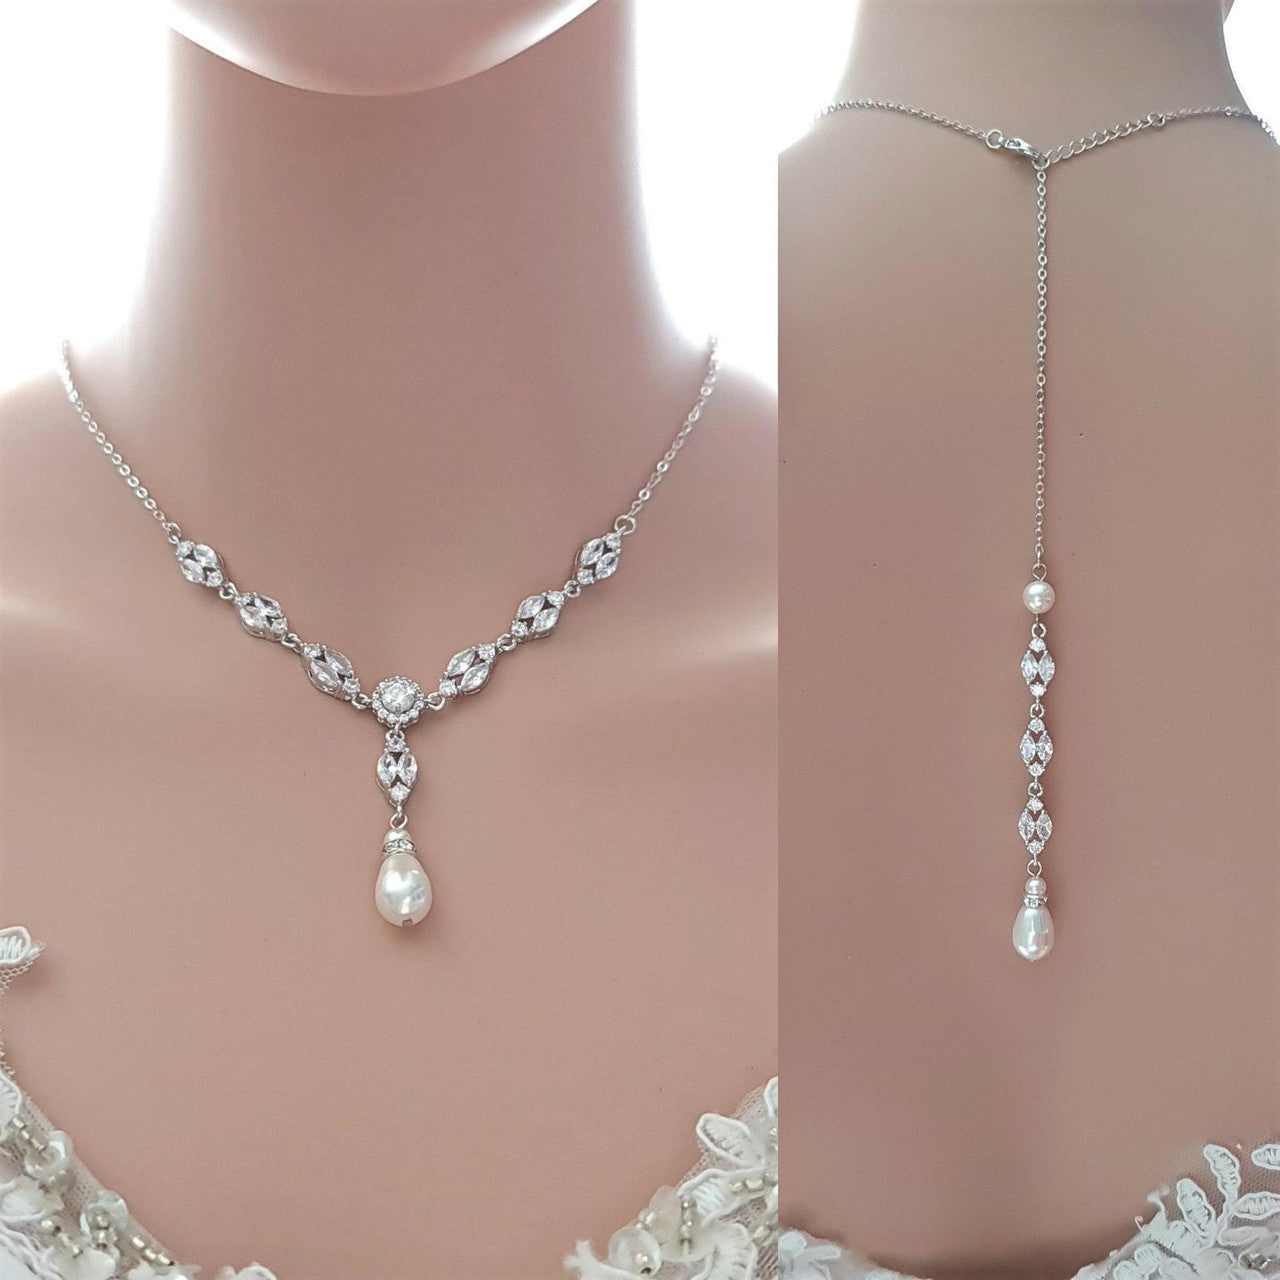 Gold Bridal Jewellery Set with Pearl Crystal Earrings Back Necklace Bracelet Set-Hayley